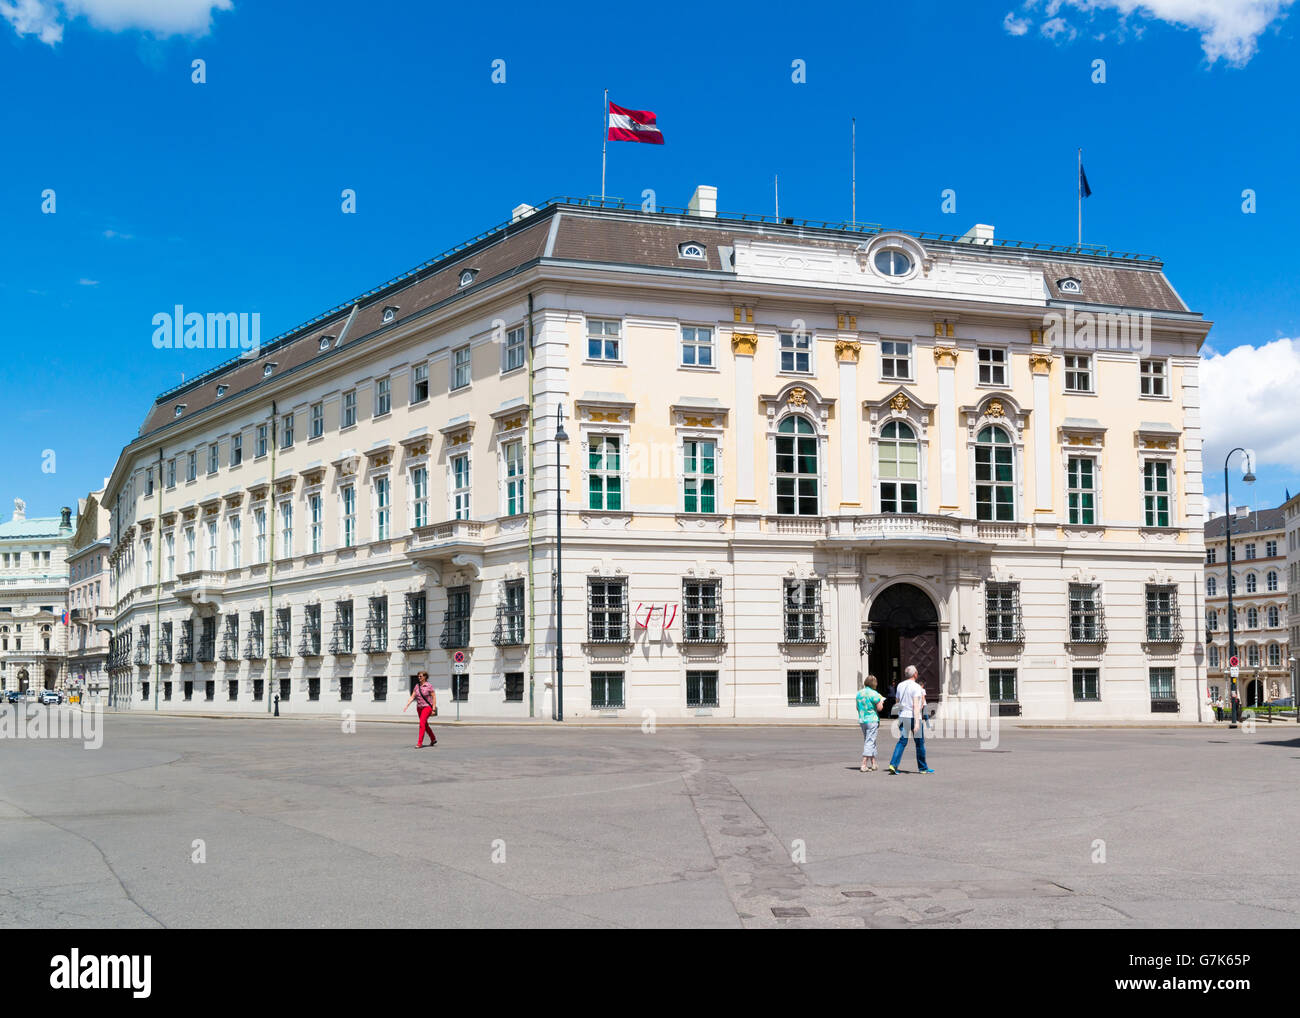 Ballhaus square with people and Federal Chancellery or BKA, Bundeskanzleramt govenment building in inner city of Vienna, Austria Stock Photo